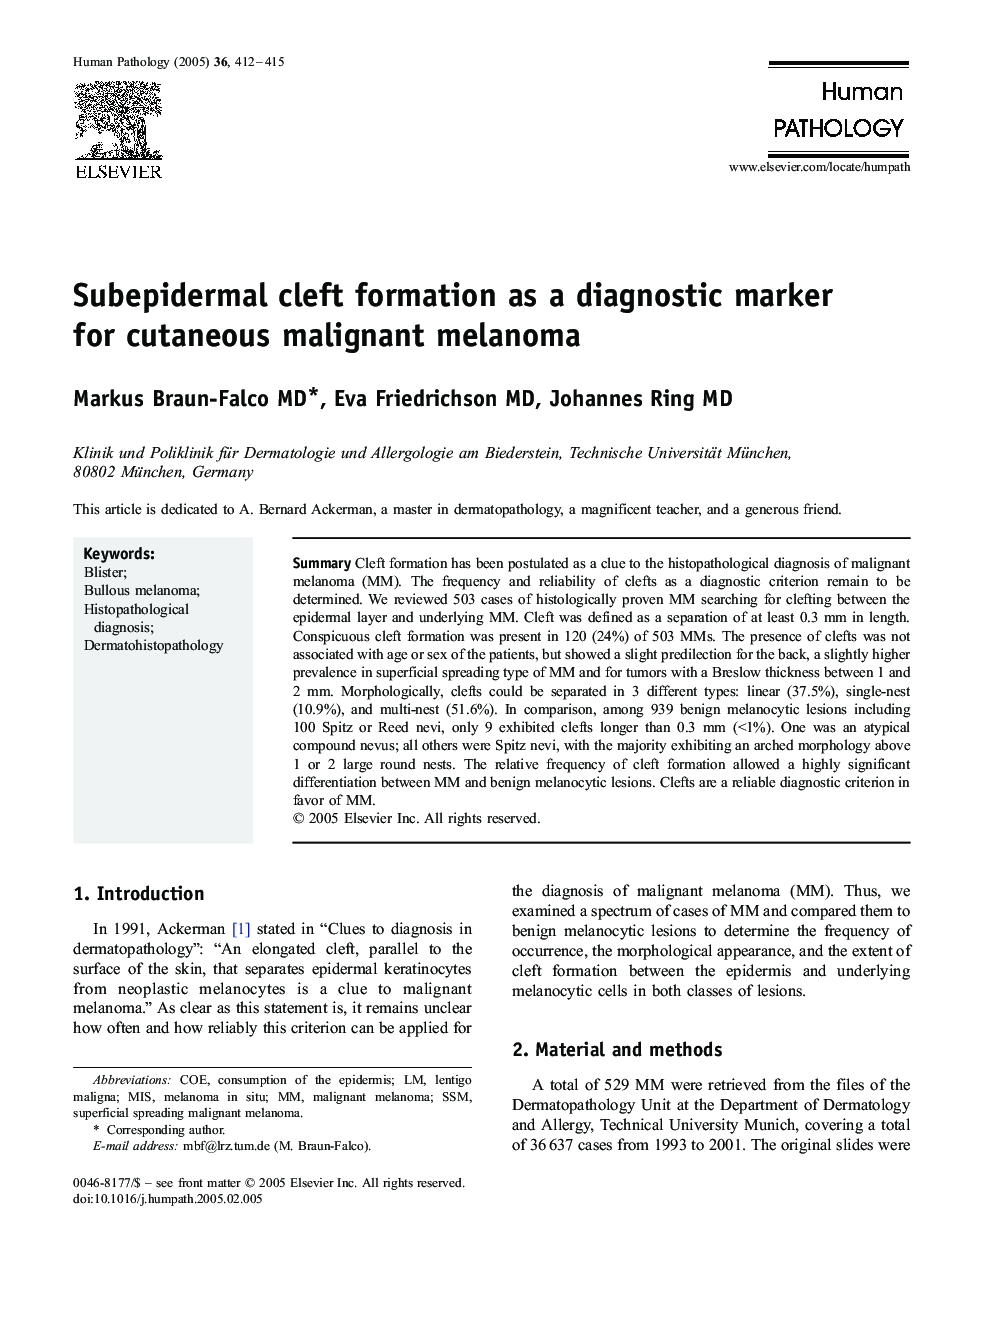 Subepidermal cleft formation as a diagnostic marker for cutaneous malignant melanoma